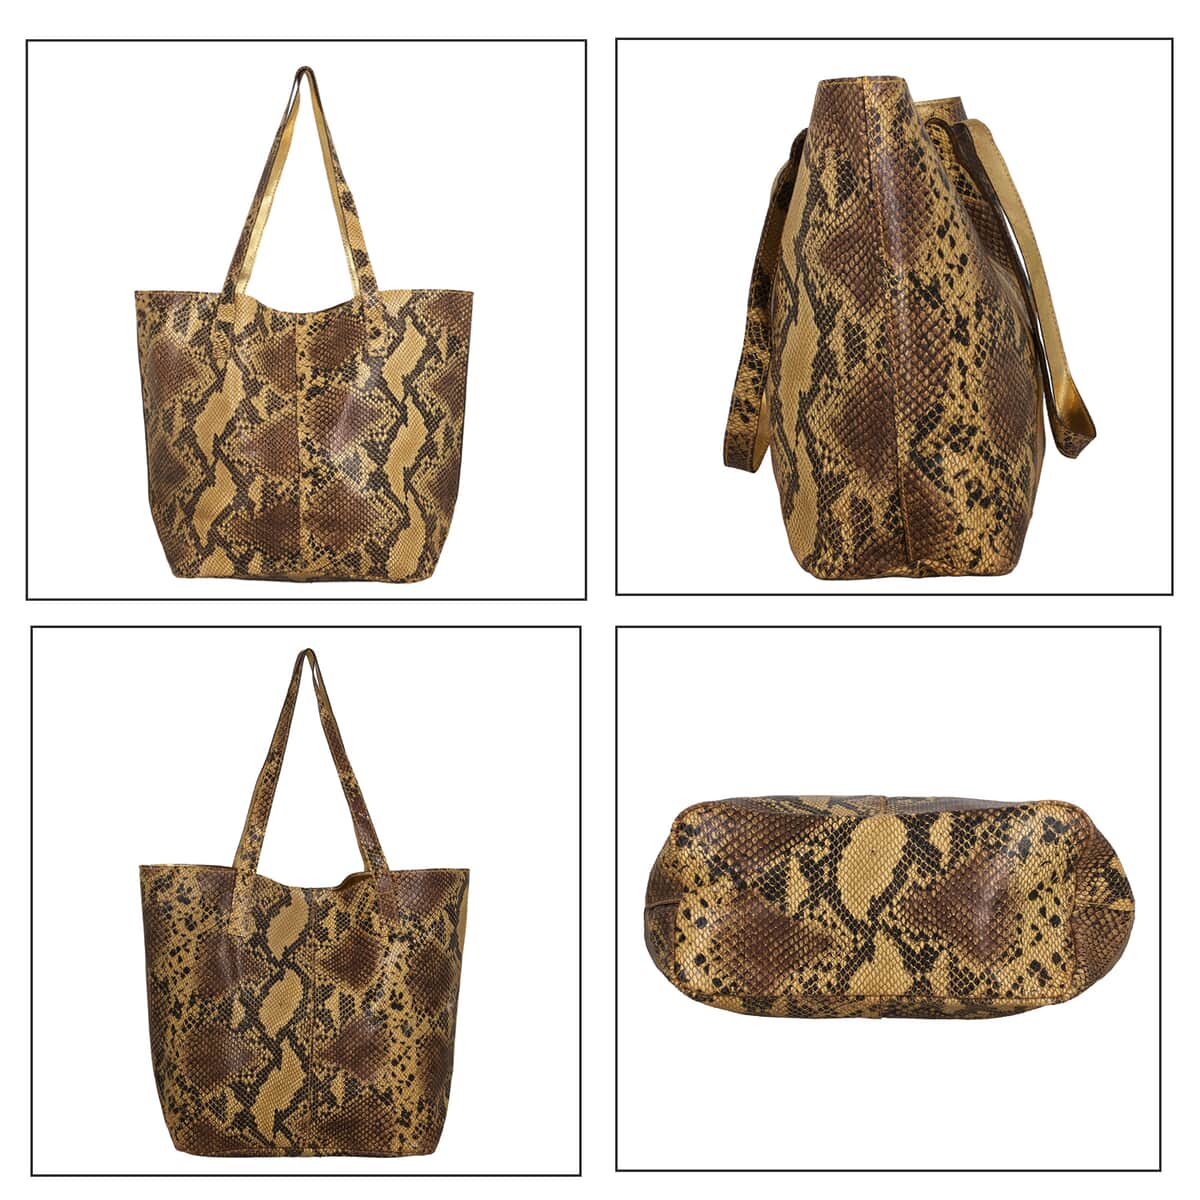 Black and Yellow Snake Foil Print 100% Genuine Leather Tote Bag (14.56"x 3.74" x 8.66") image number 4